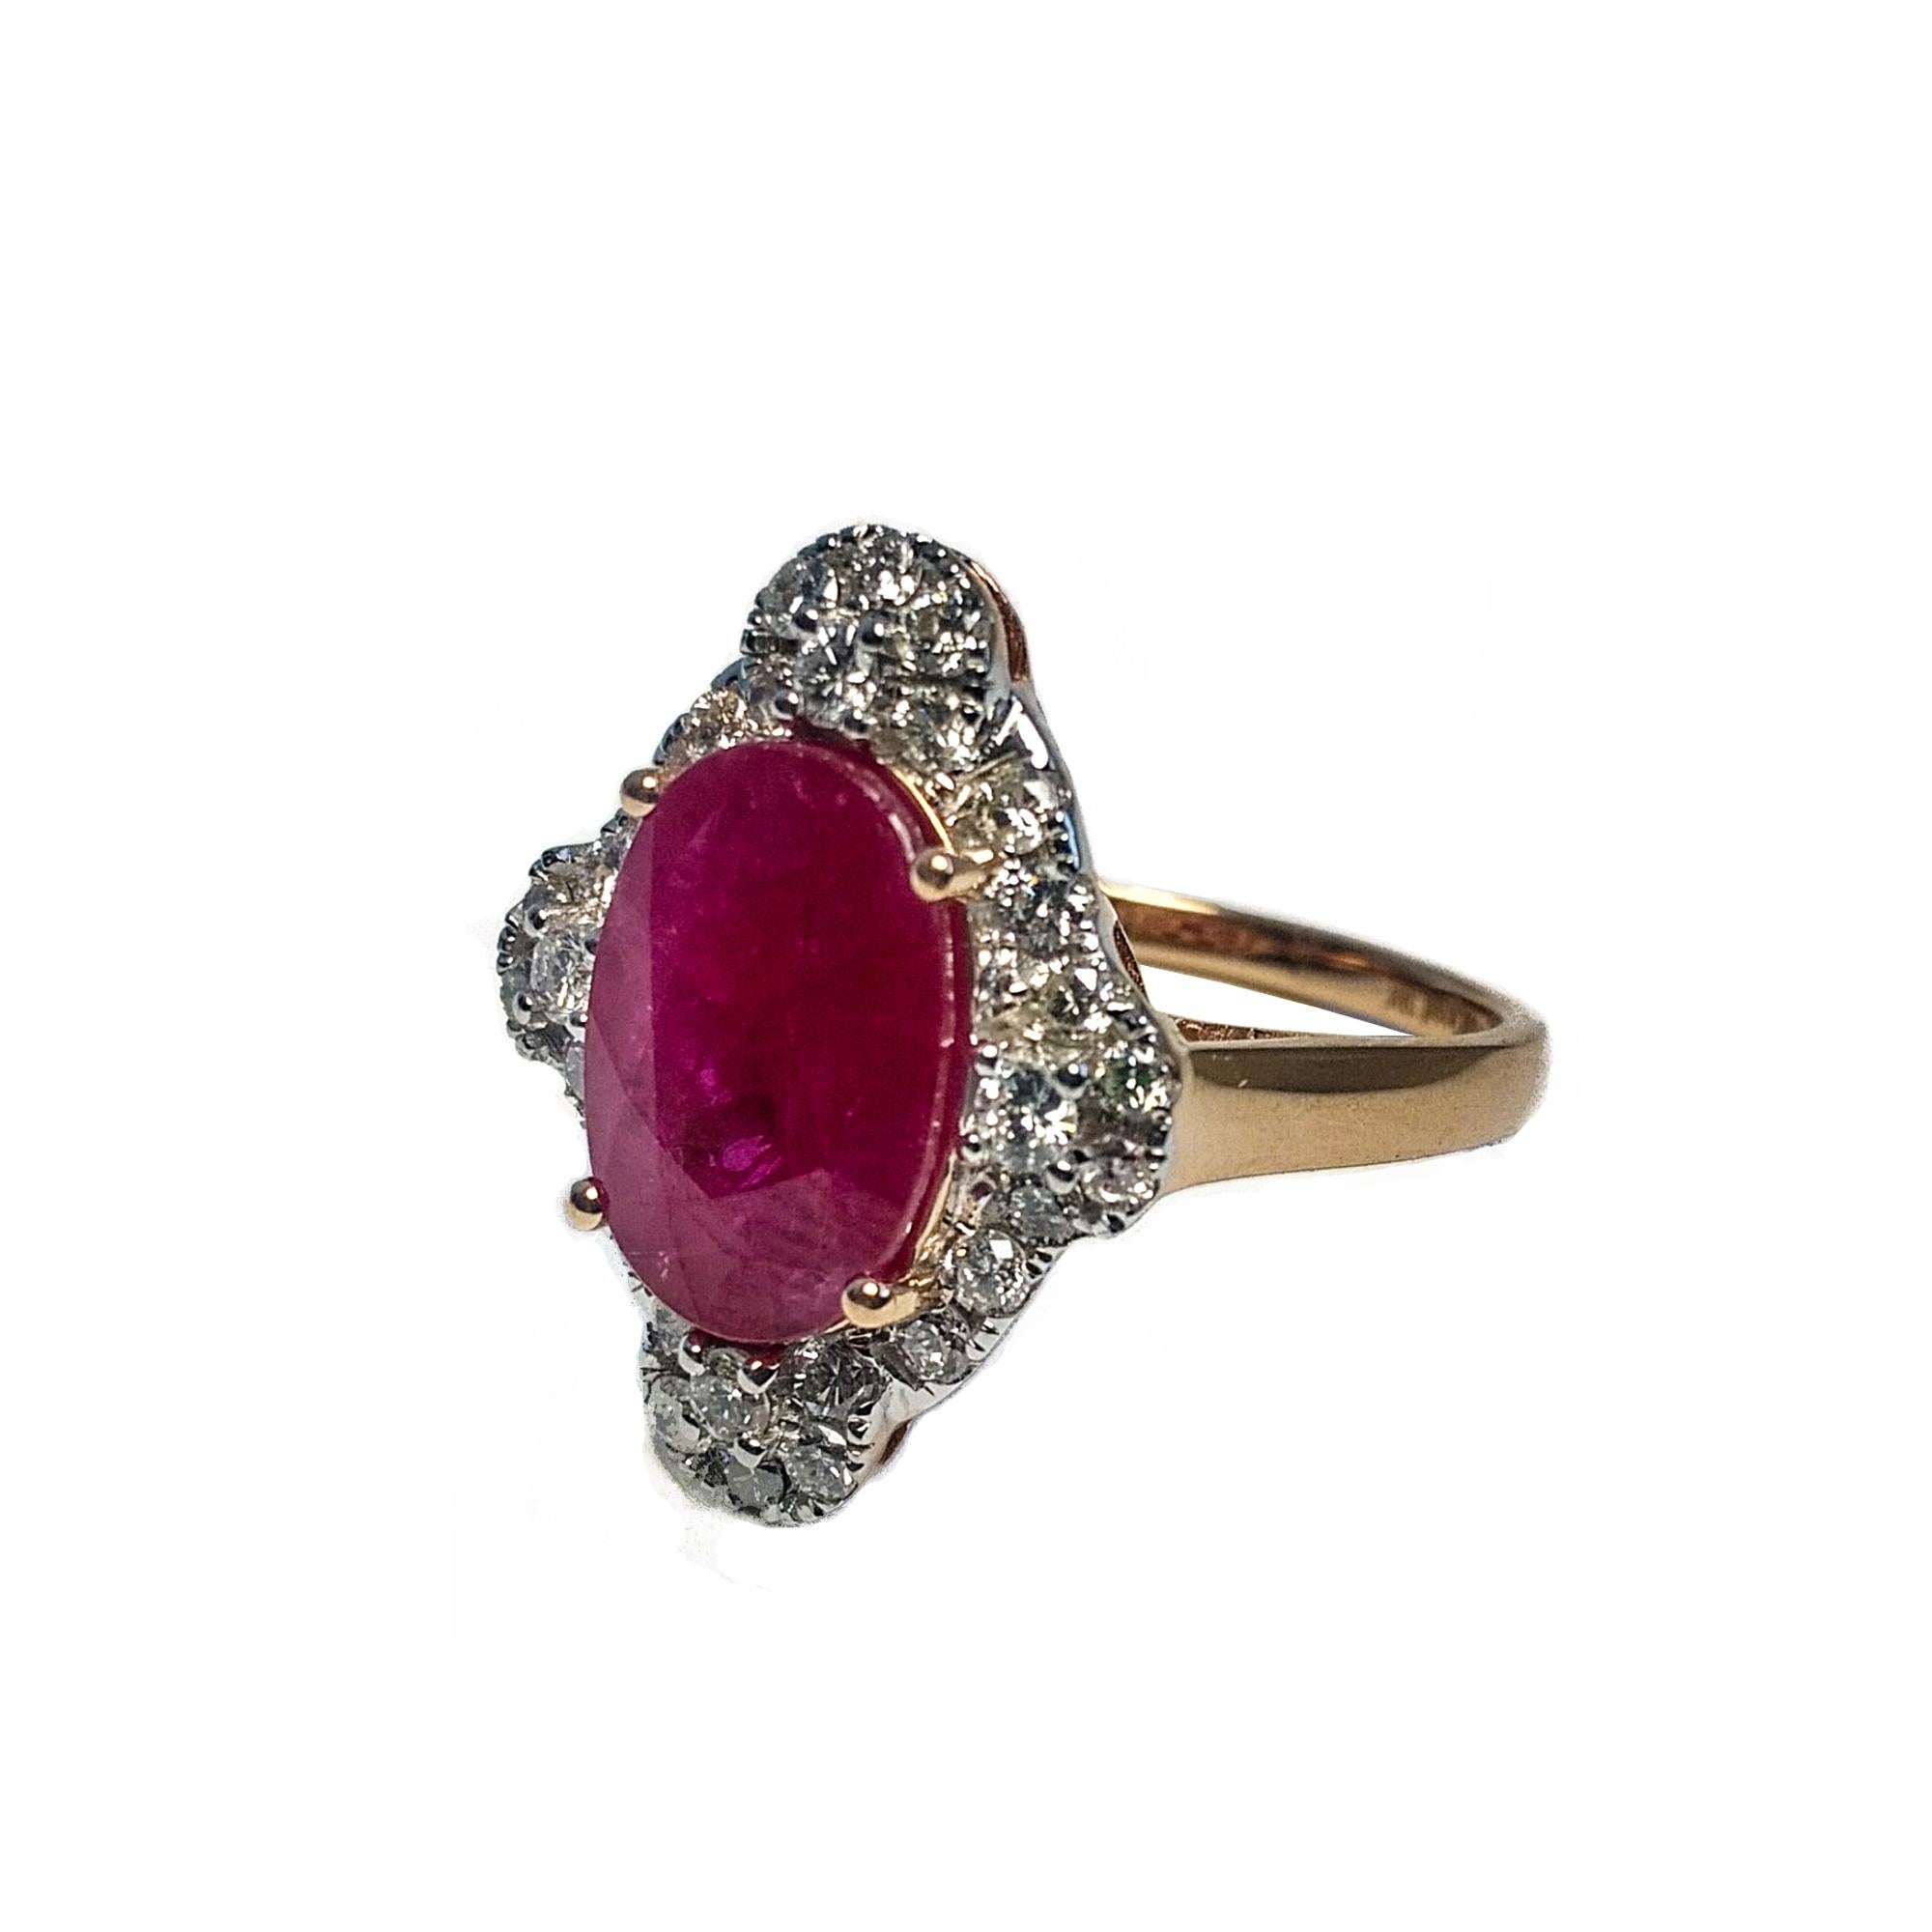 Glamorous design, crimson red, oval faceted ruby ring, set in high profile mount with 4 prongs, lively color ruby, accented with sparkling round brilliant cut diamonds with basket design back, beautiful craftsmanship in 18 karat yellow gold with GIA